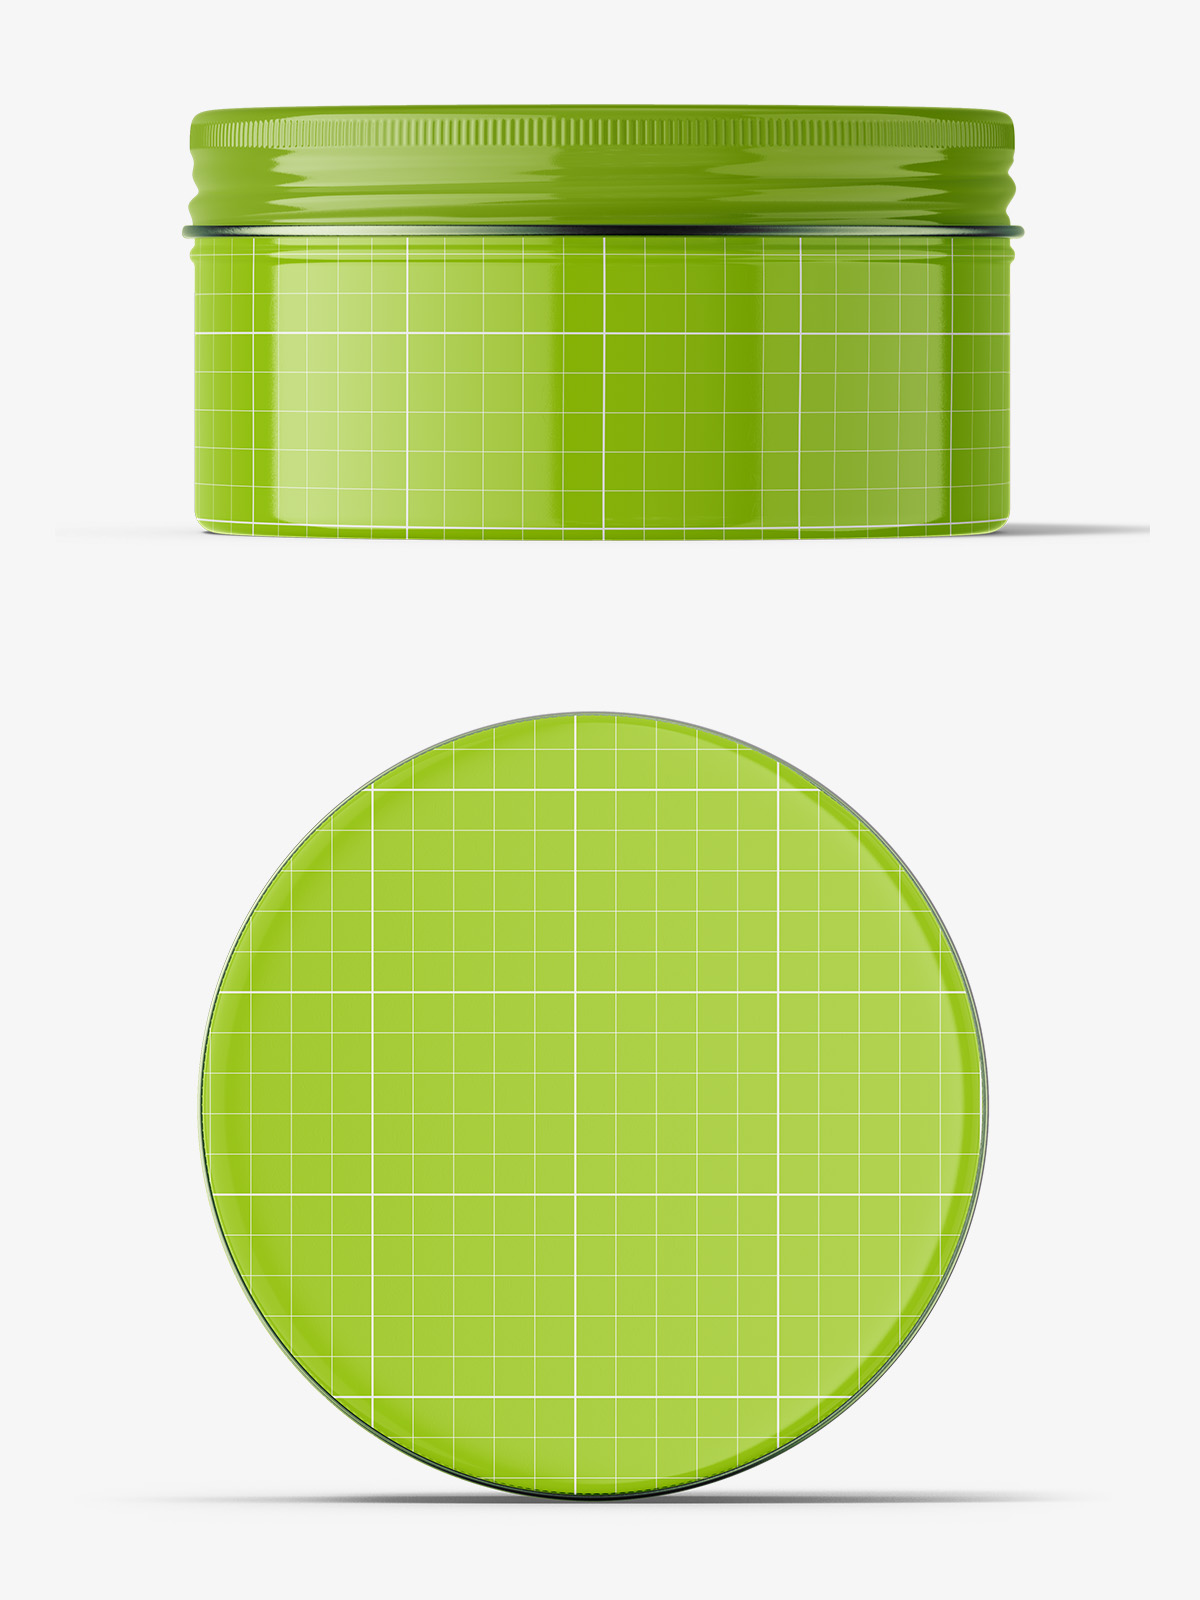 Download Glossy tin cream jar mockup / top and front view - Smarty ...